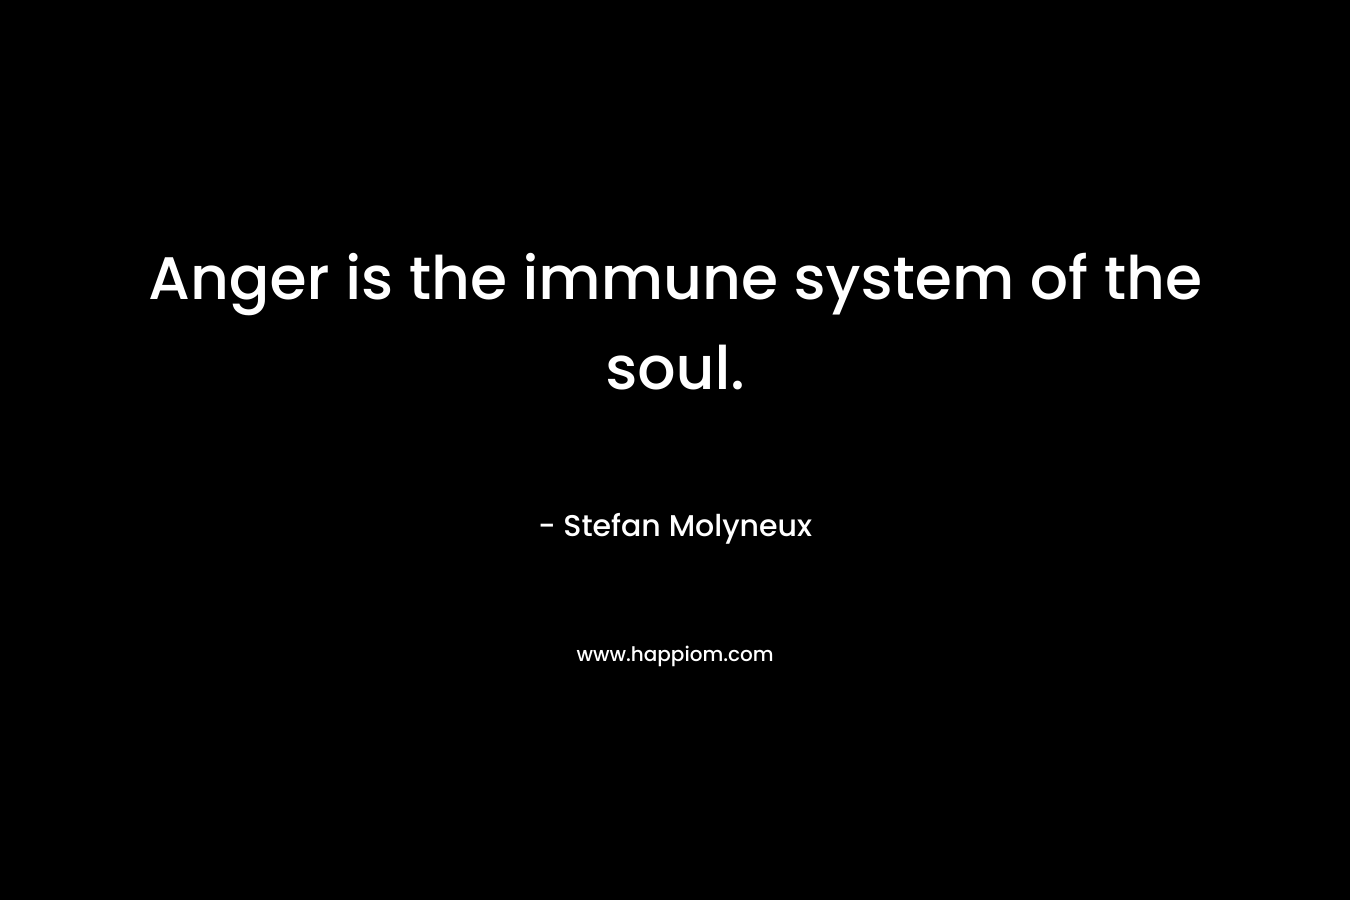 Anger is the immune system of the soul.